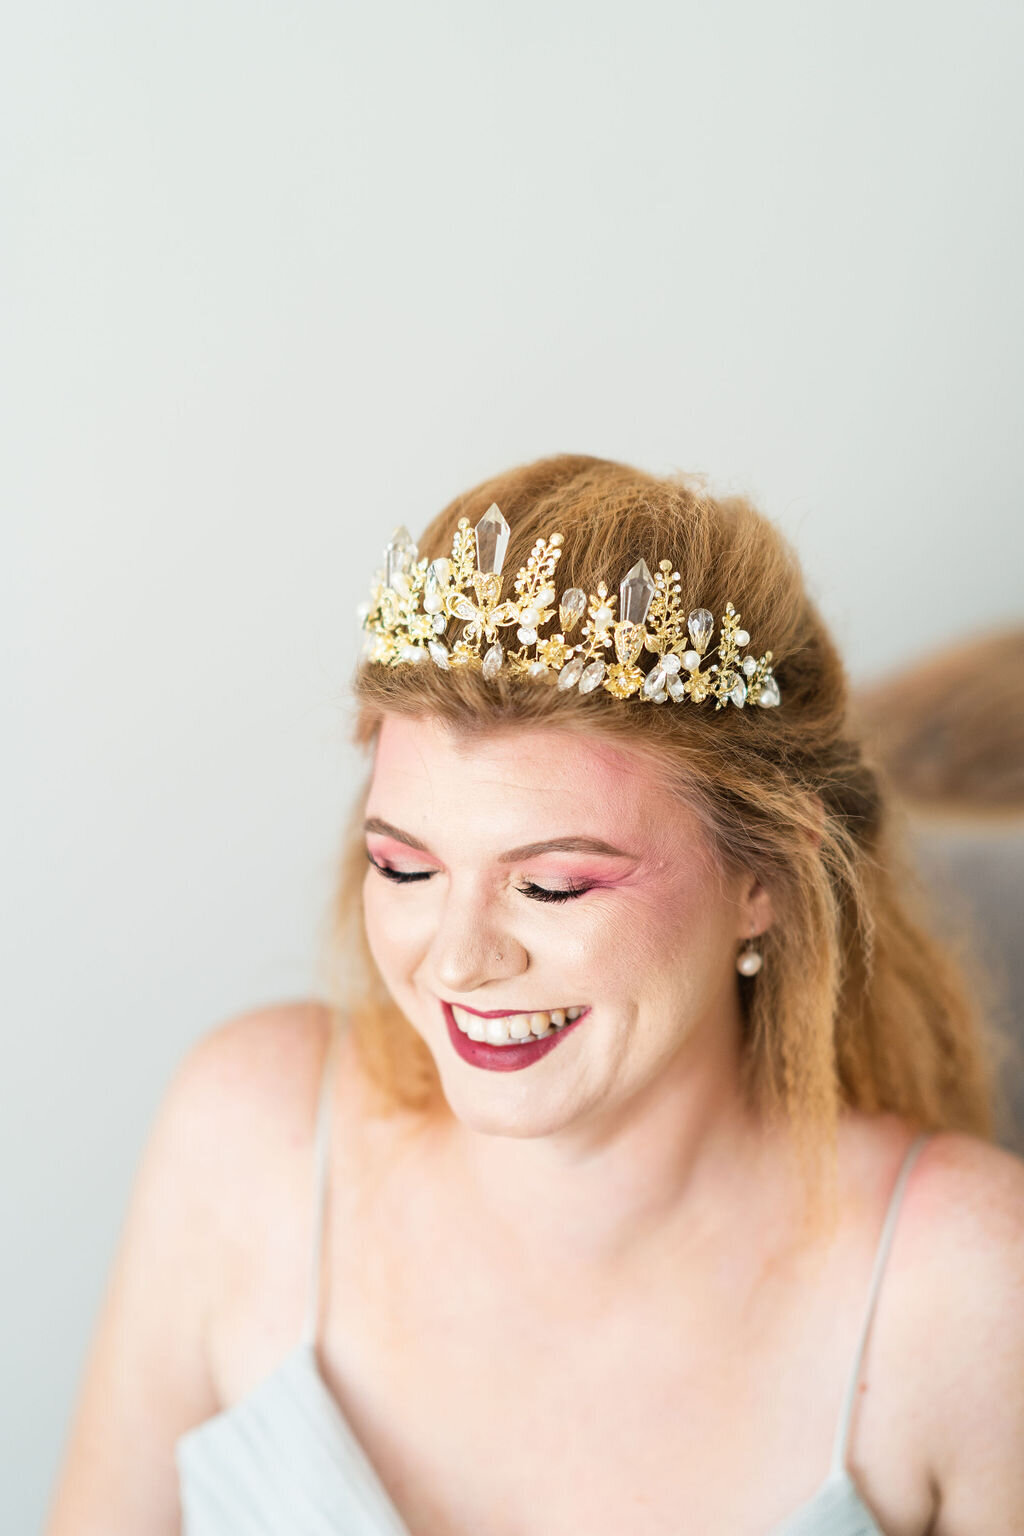 Wedding Hair and Makeup Services in Northern Virginia